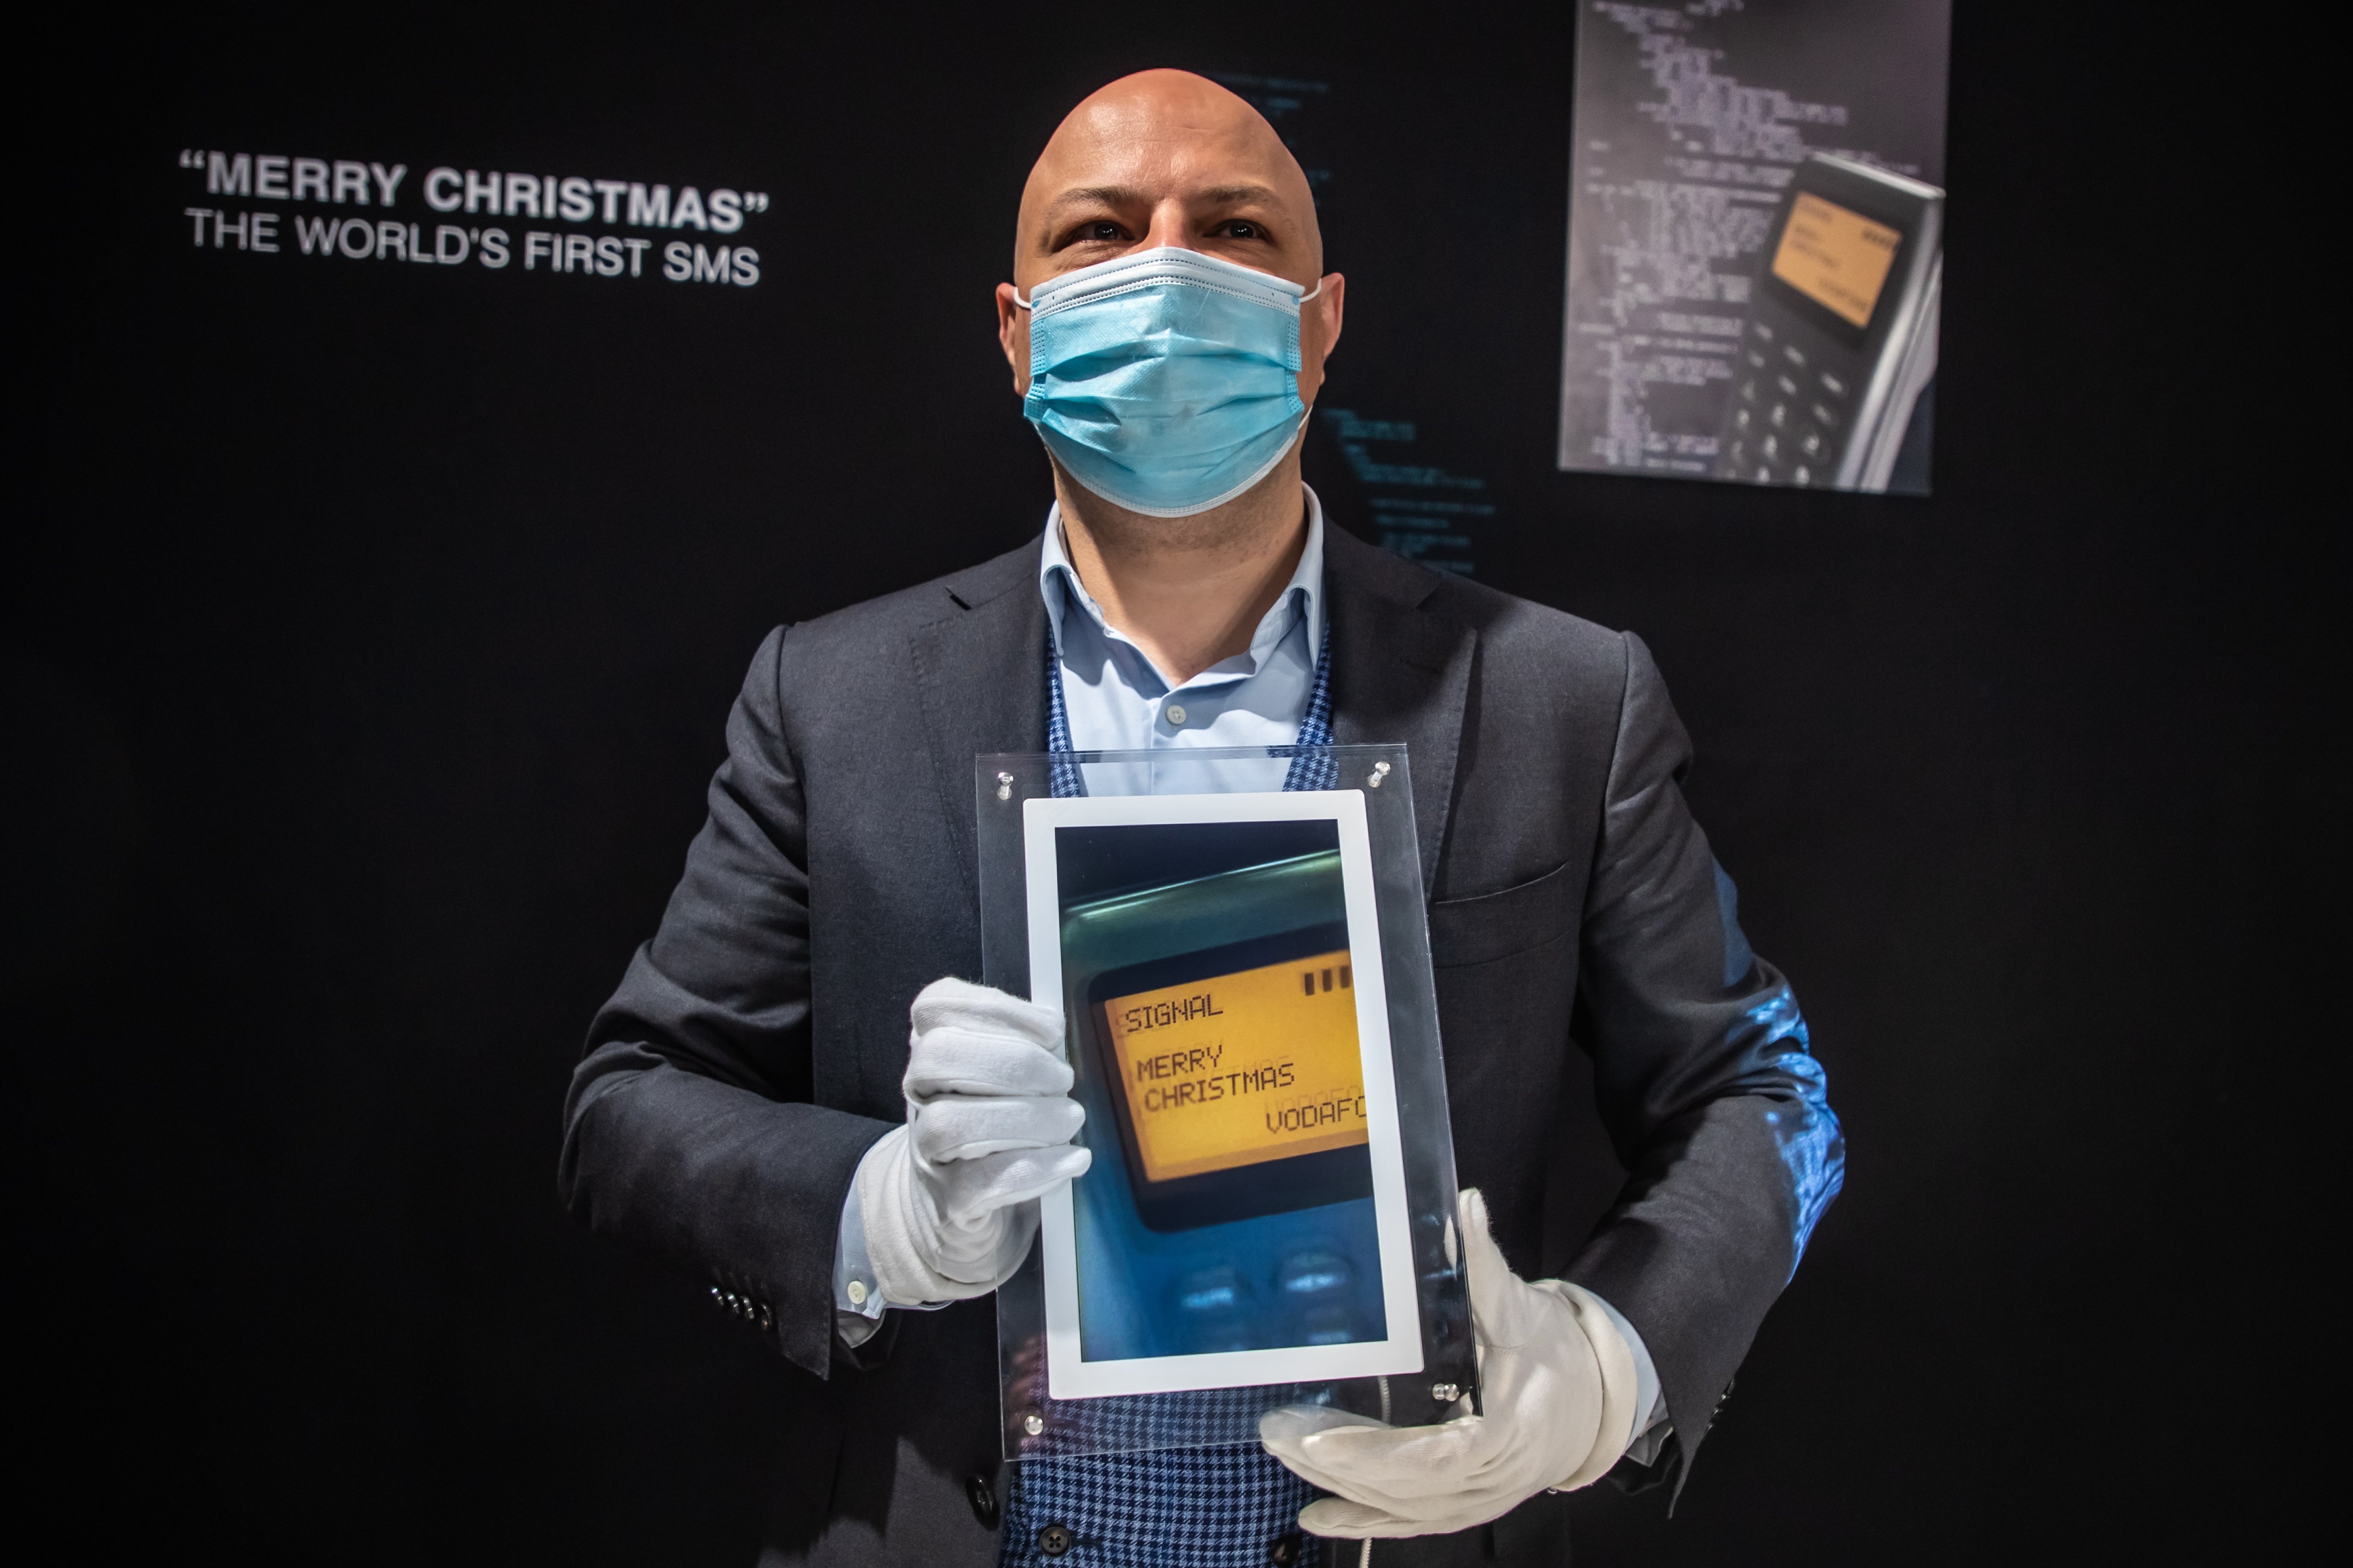 An Aguttes auction house staff shows a digital frame displaying the message "Merry Christmas," the first SMS in history, Paris, France, Dec. 21, 2021. (EPA Photo)